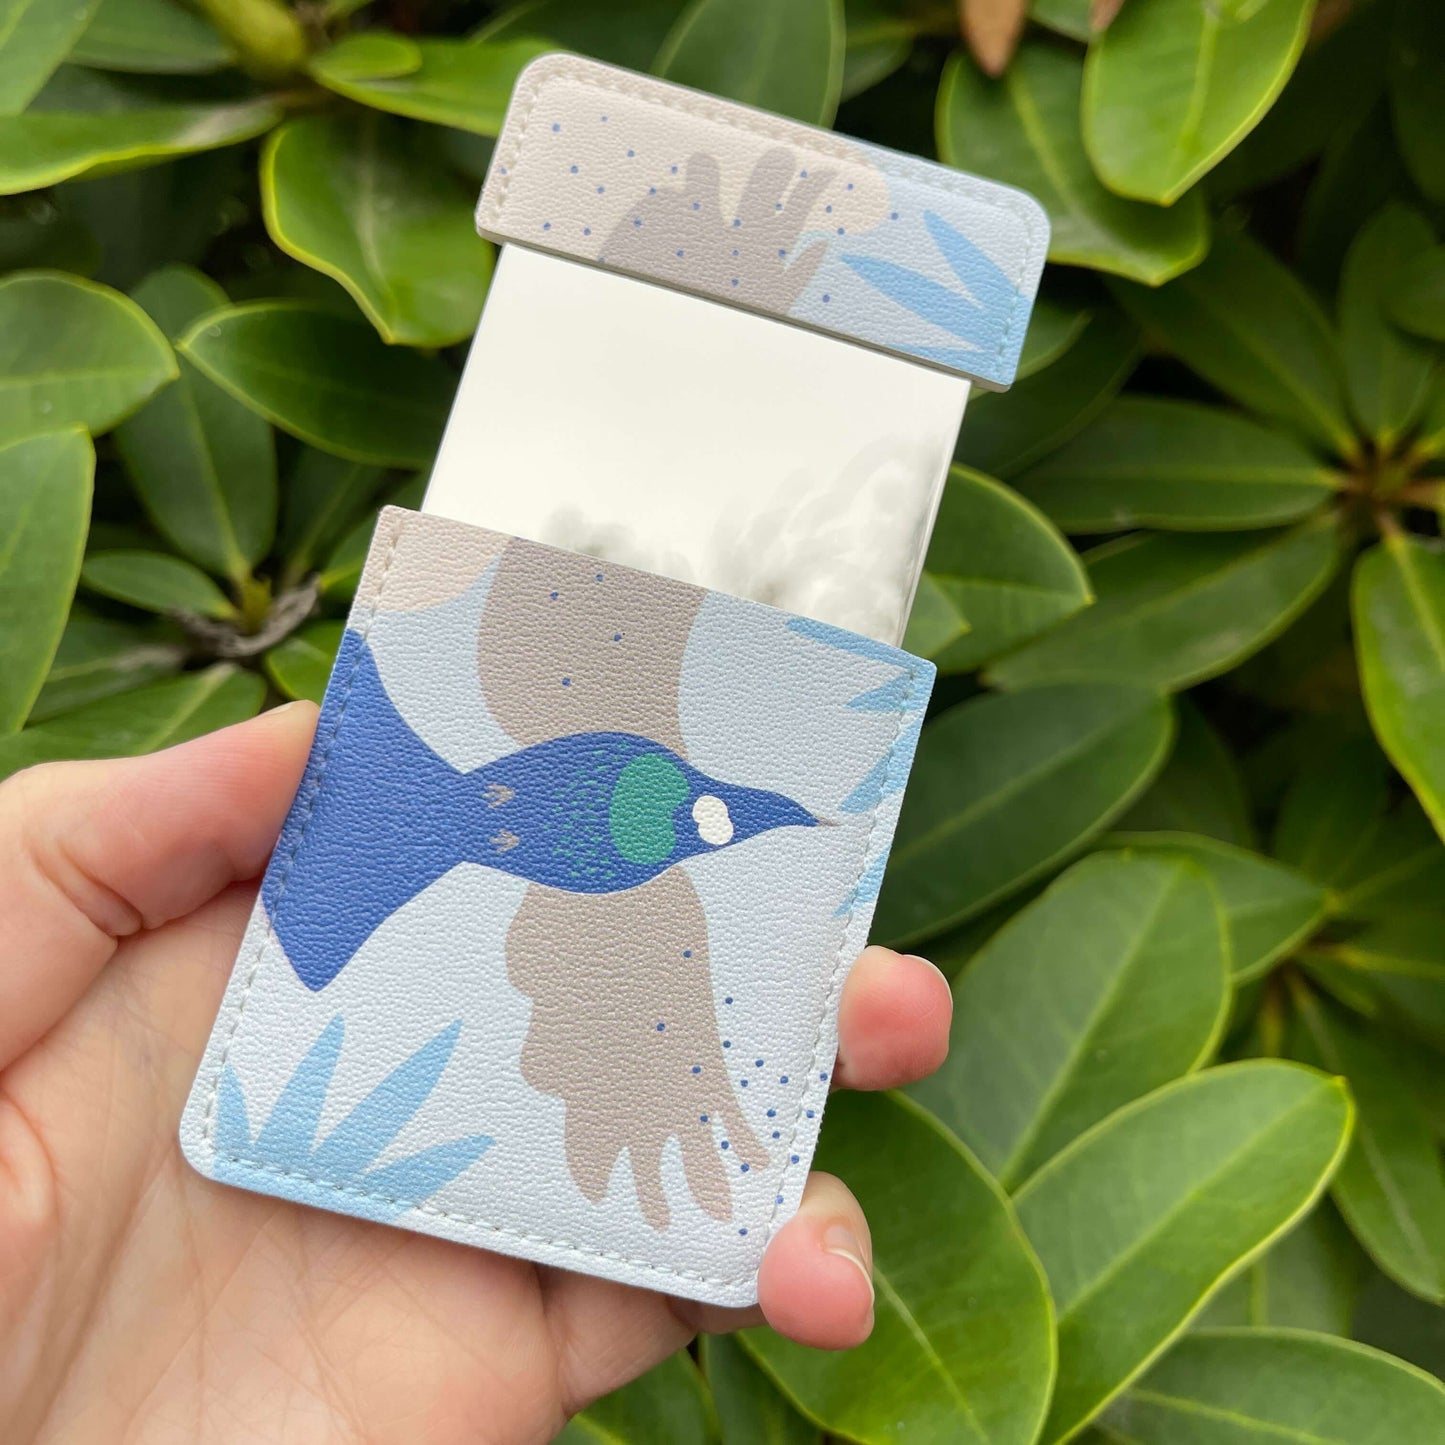 Pocket Mirror - Cut-out Tui with blue and grey accents.